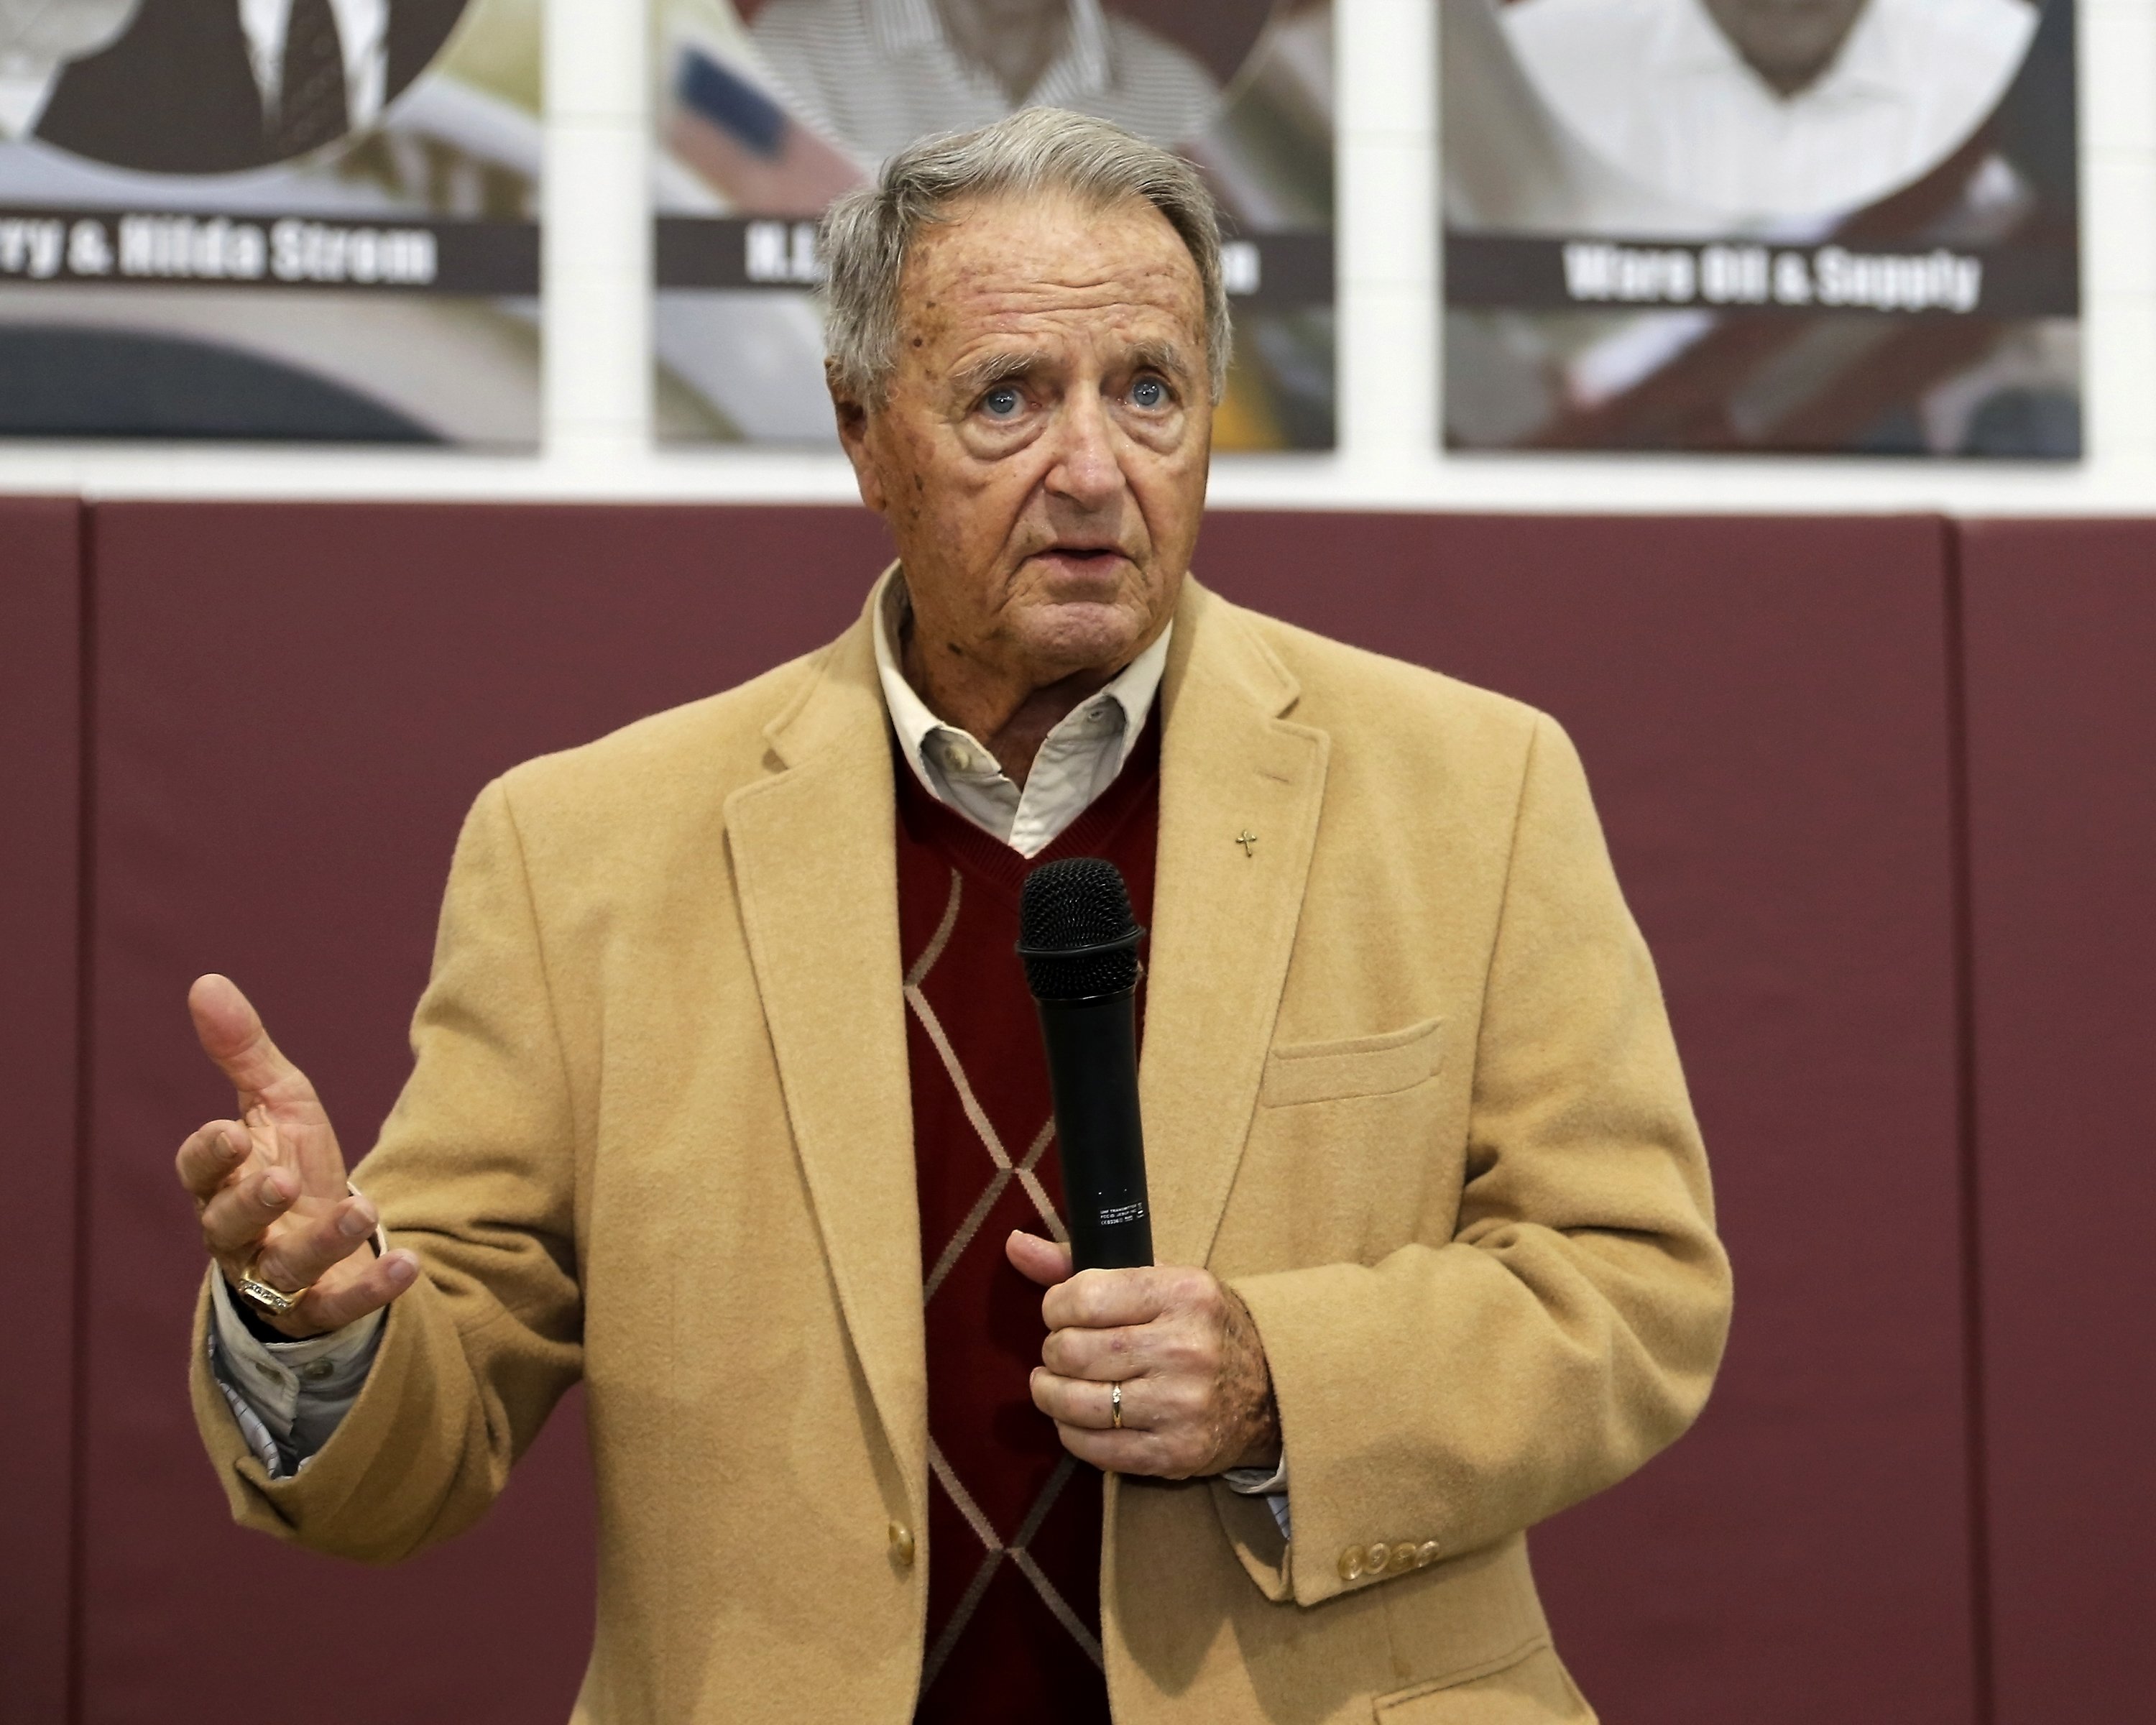 Bobby Bowden at Doak Campbell Stadium on October 26, 2013, in Tallahassee, Florida. | Source: Getty Images.